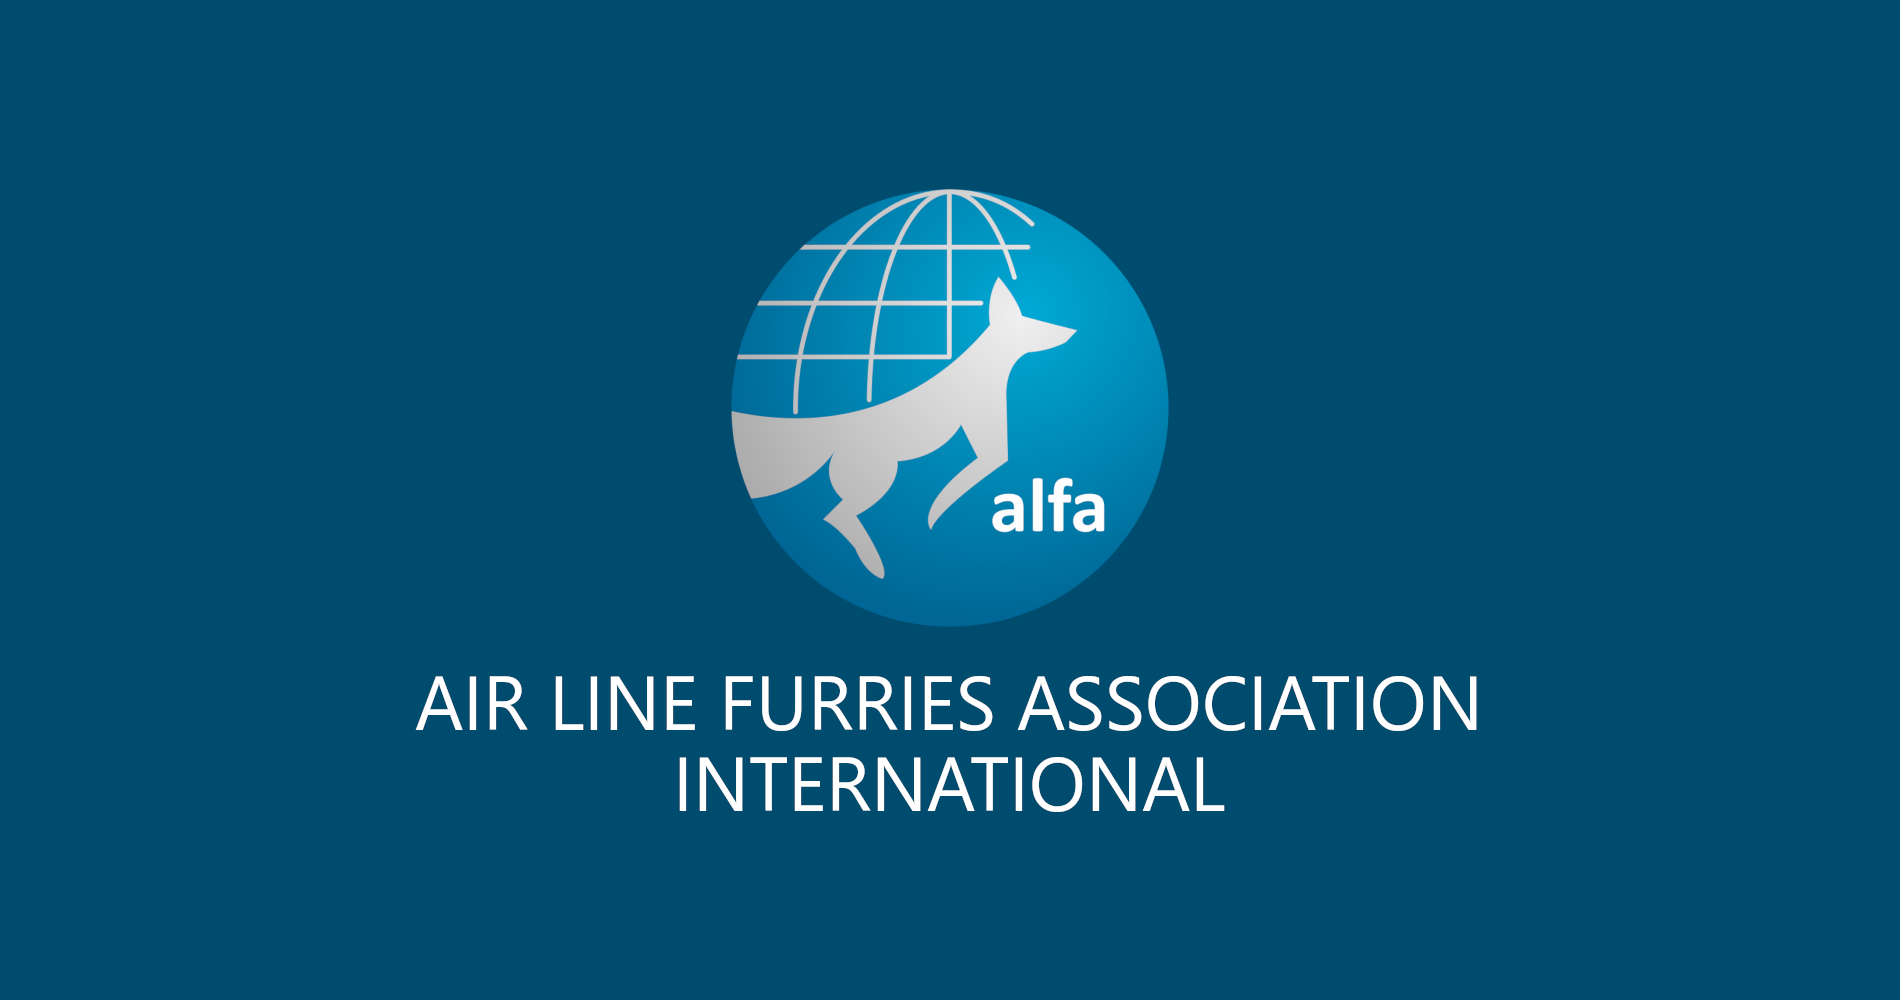 The flag of ALFA. In the center of the flag is the ALFA logo. Beneath it is the text 'Air Line Furries Association, International' on two lines, with 'International' the sole word on the second line.